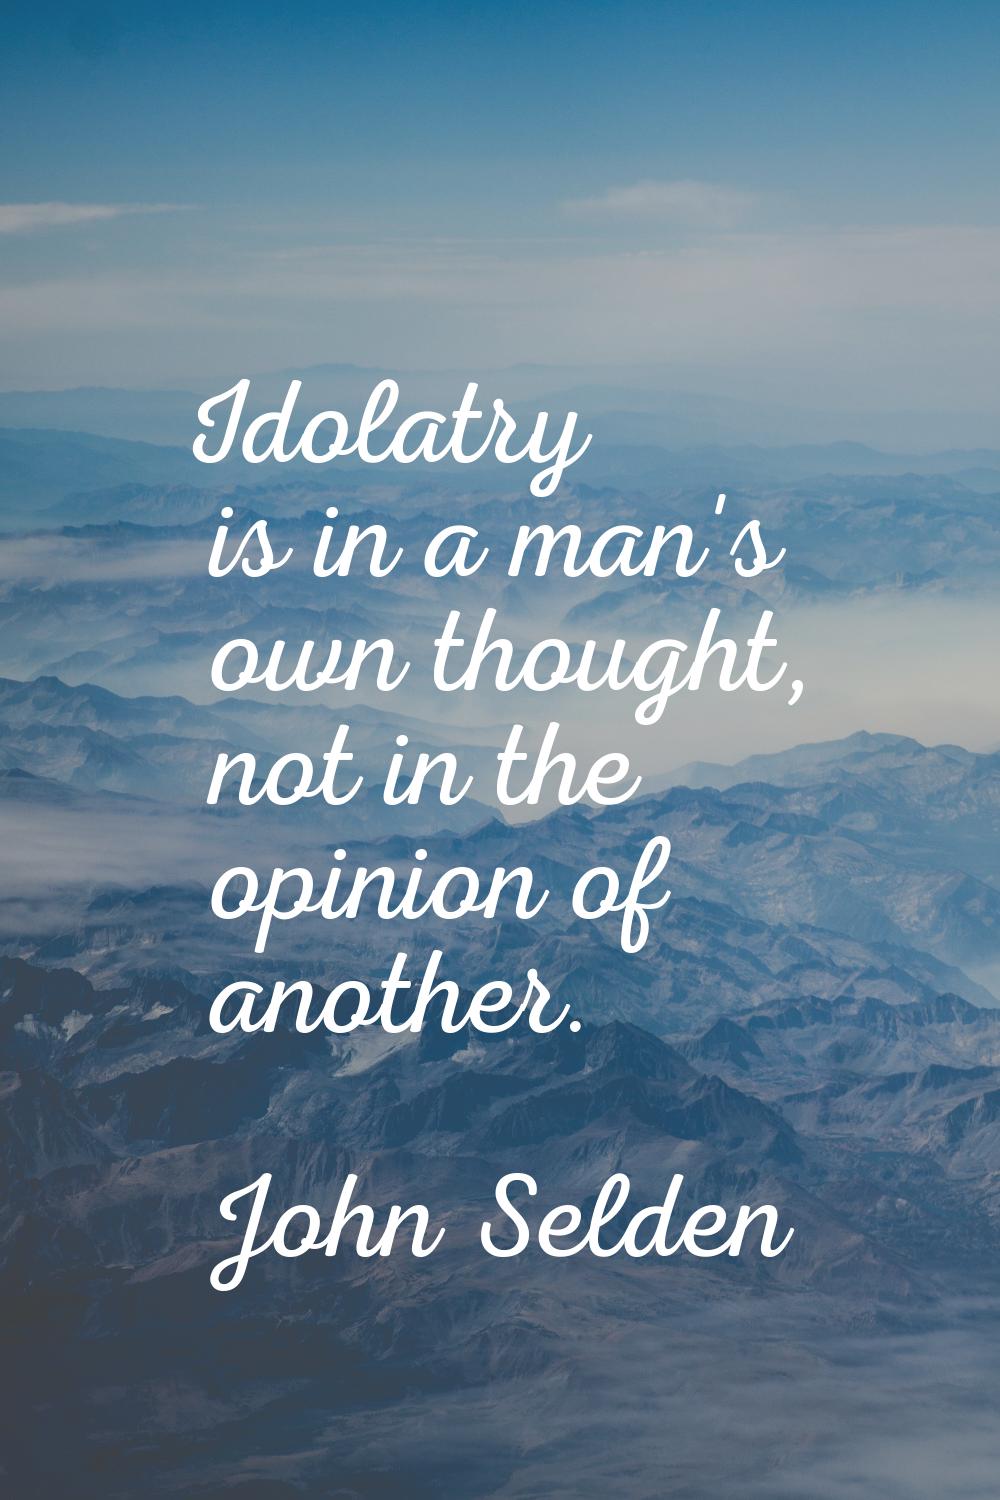 Idolatry is in a man's own thought, not in the opinion of another.